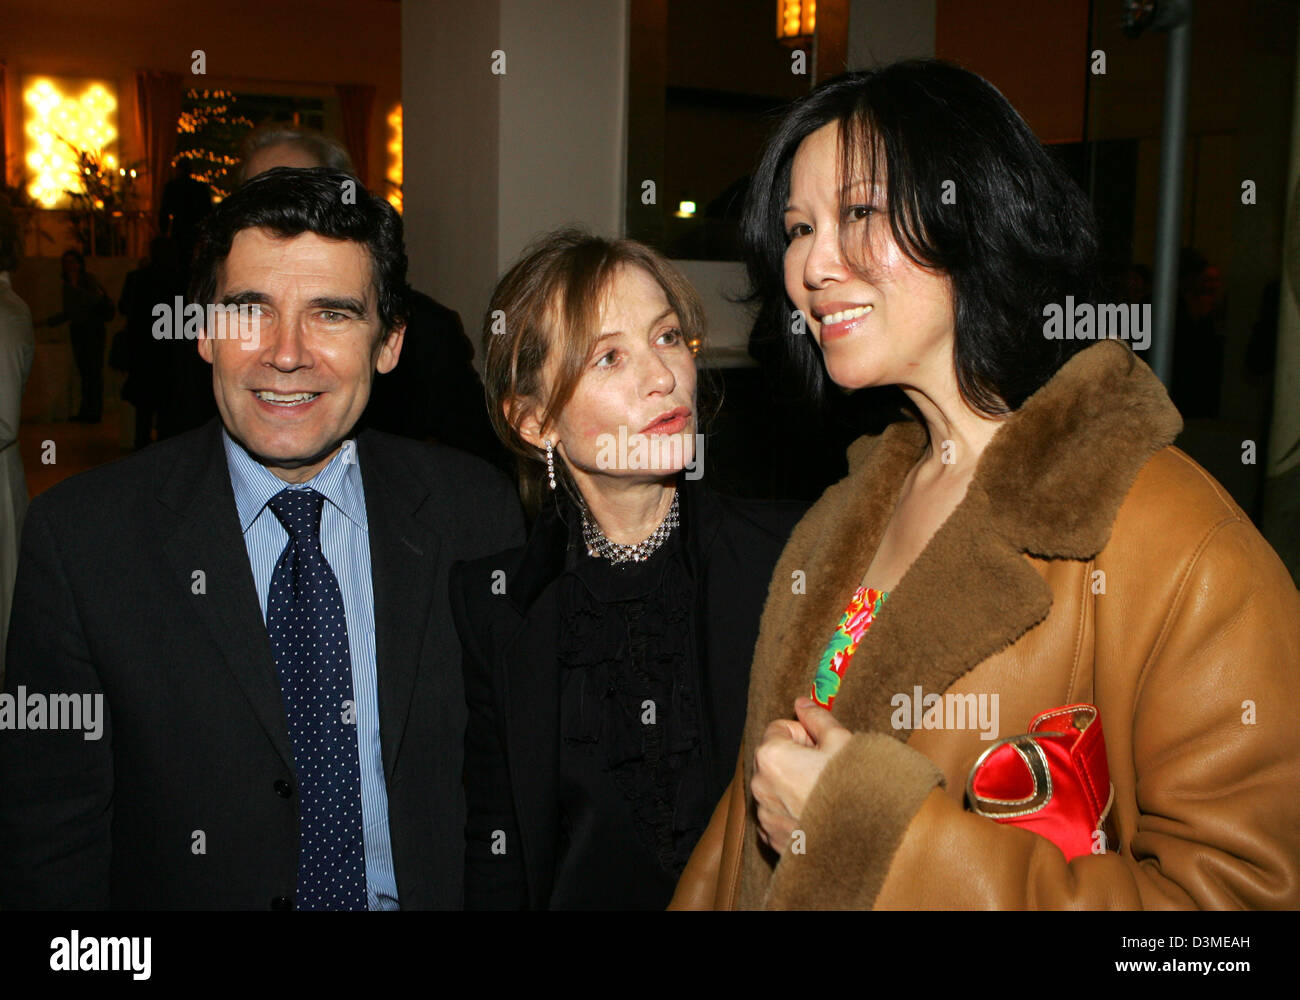 French ambassador Claude Martin and his wife Judith (R) are pictured with French actress Isabelle Huppert during the party for the premiere of the film 'L'Ivresse Du Pouvoir' at the 56th International Film Festival in Berlin, Thursday, 16 February 2006. The film runs in the competition at this year's film festival. Photo: Jens Kalaene Stock Photo